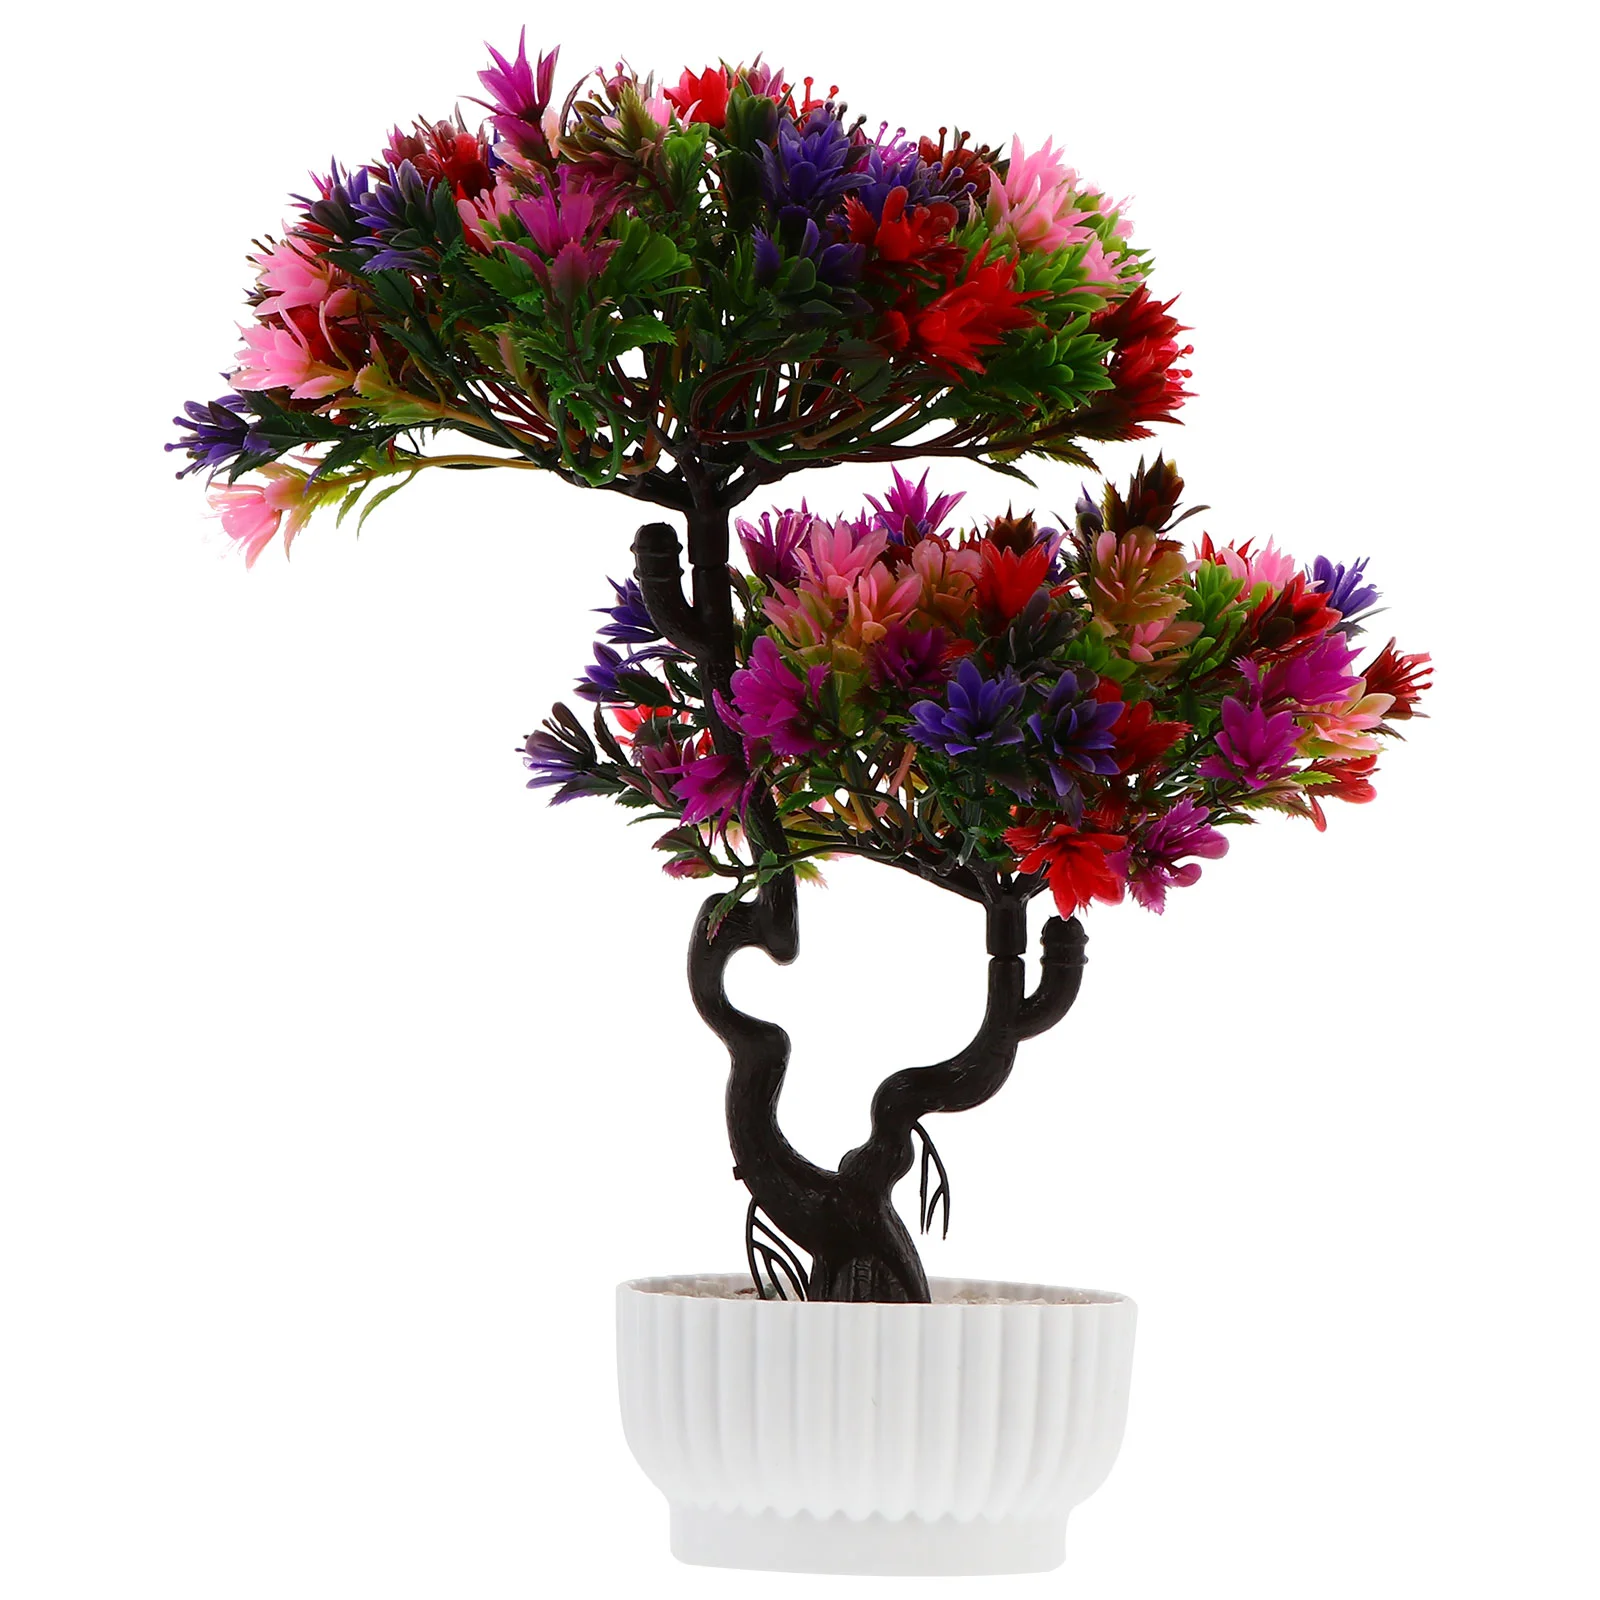 

Welcome Pine Flower Potted Fake Bonsai Simulation Ornament Japanese Decor Home Small Guest-greeting Flowerpot